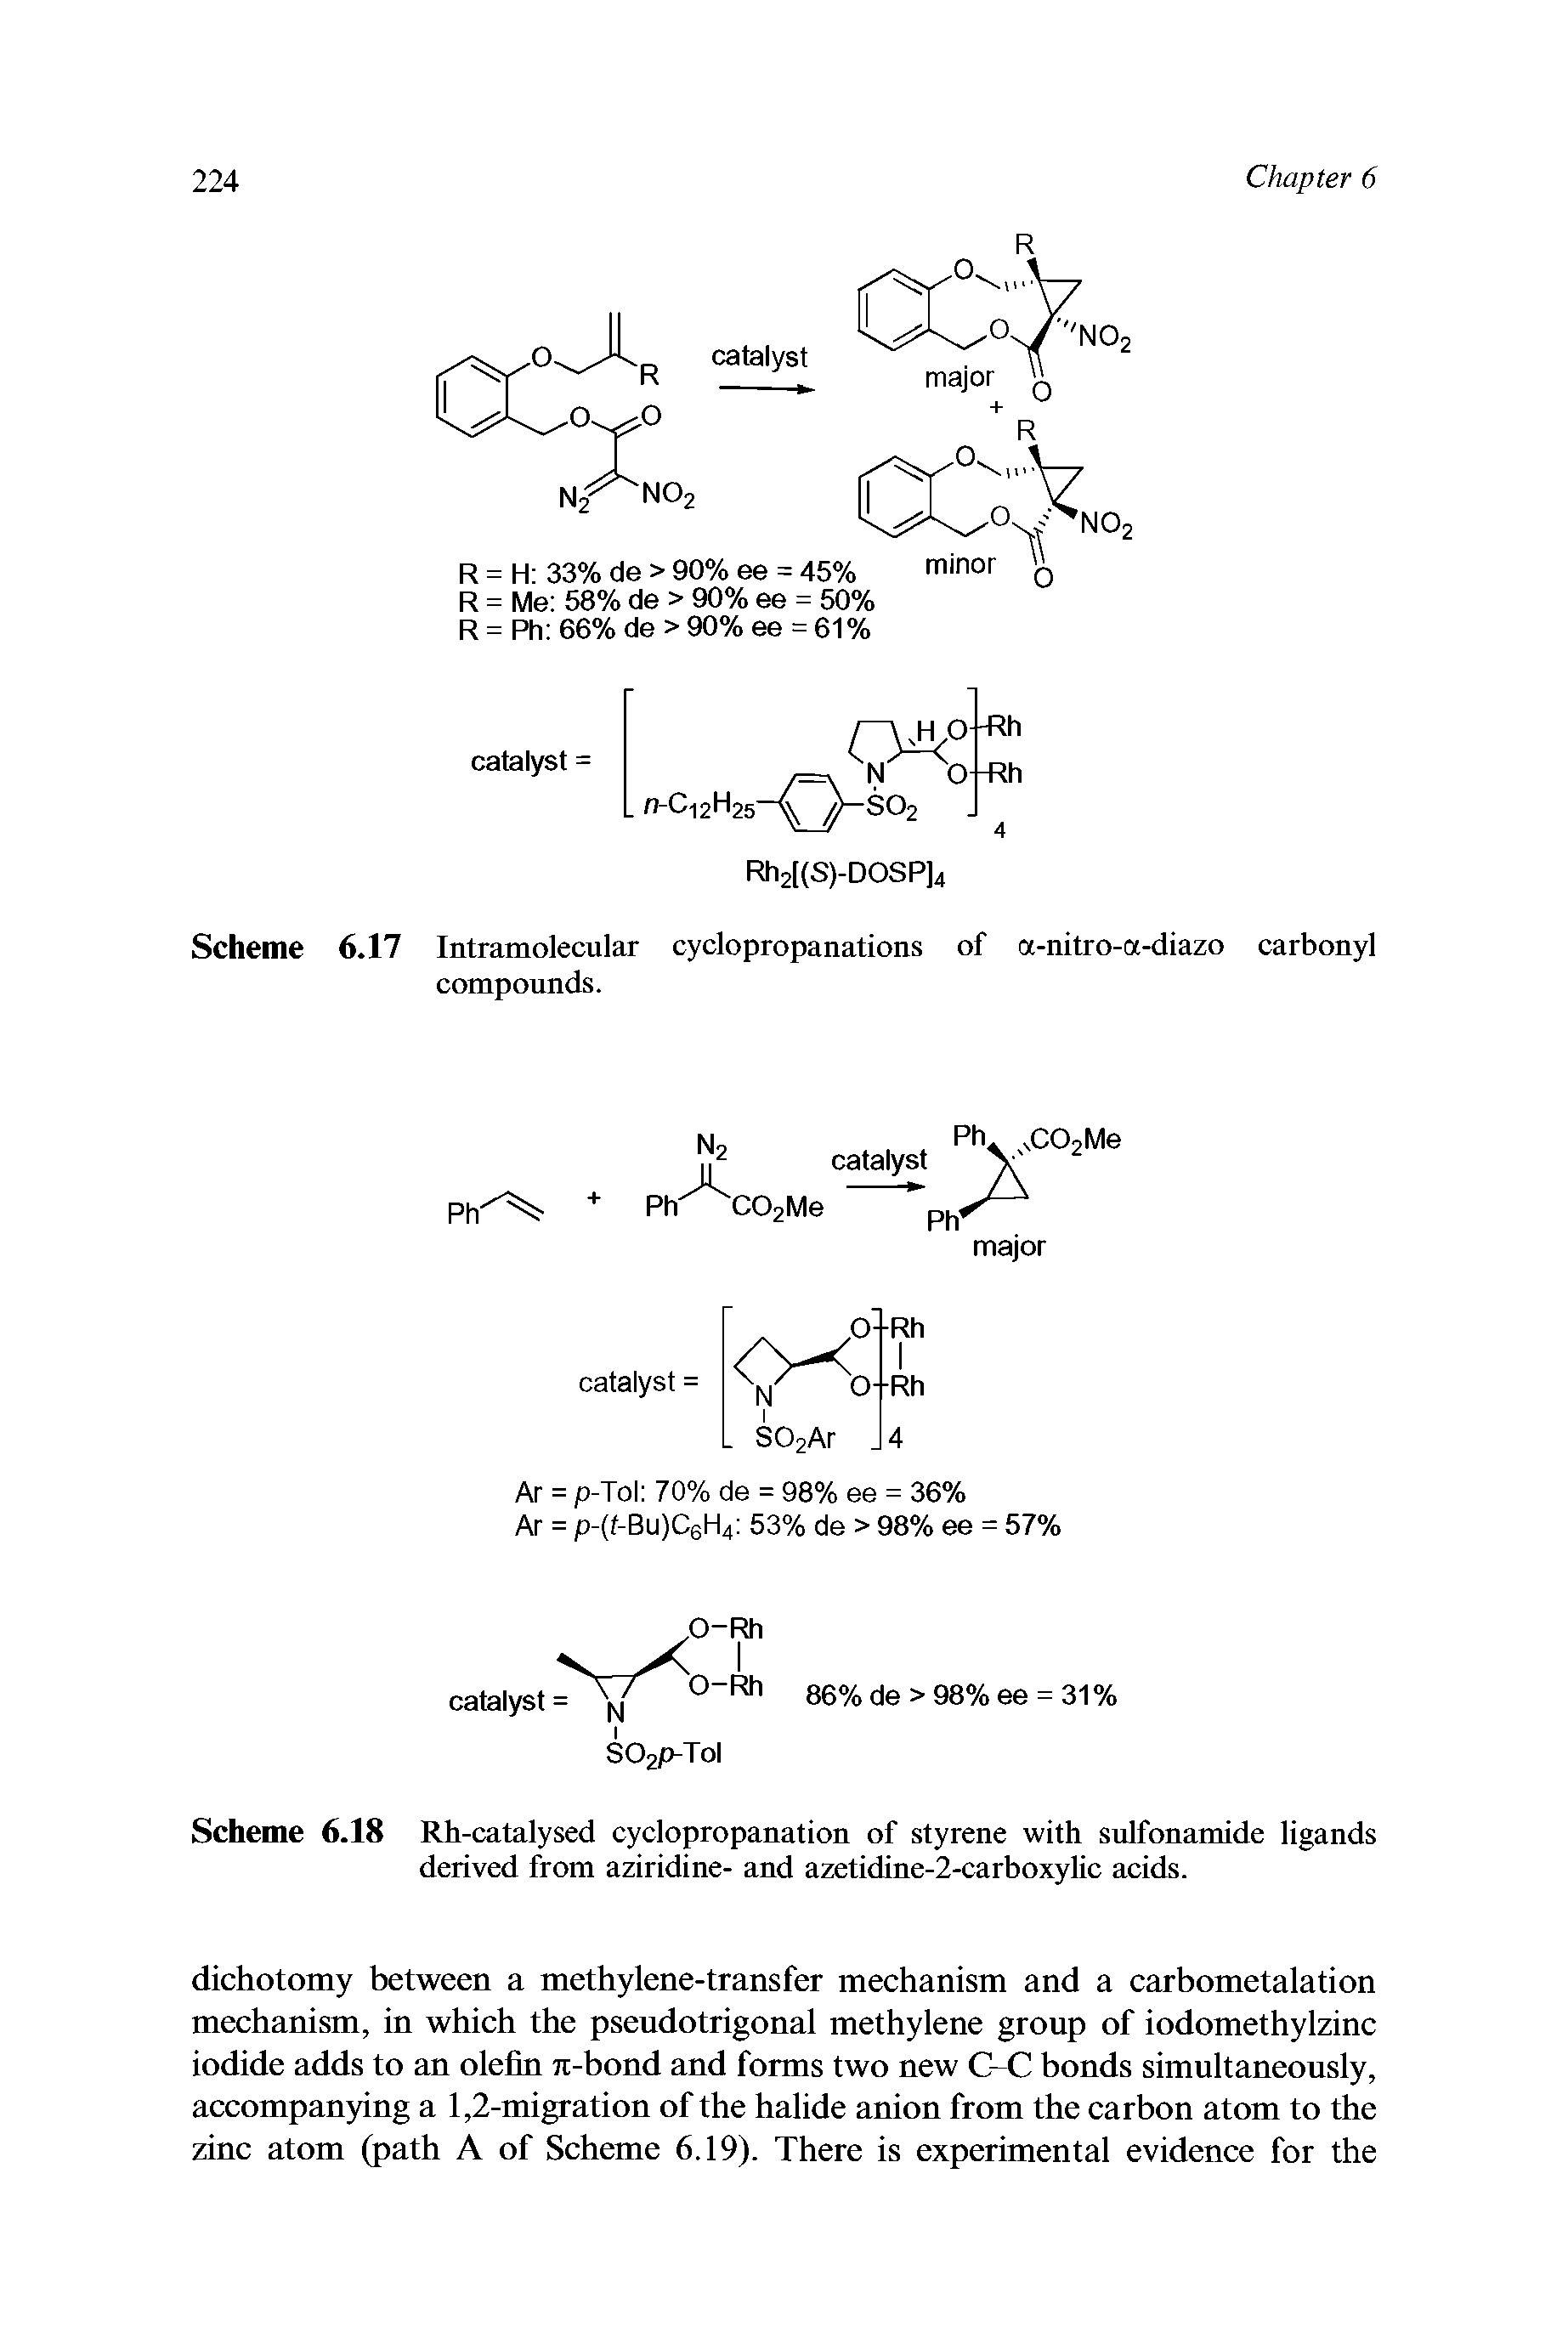 Scheme 6.18 Rh-catalysed cyclopropanation of styrene with sulfonamide ligands derived from aziridine- and azetidine-2-carboxylic acids.